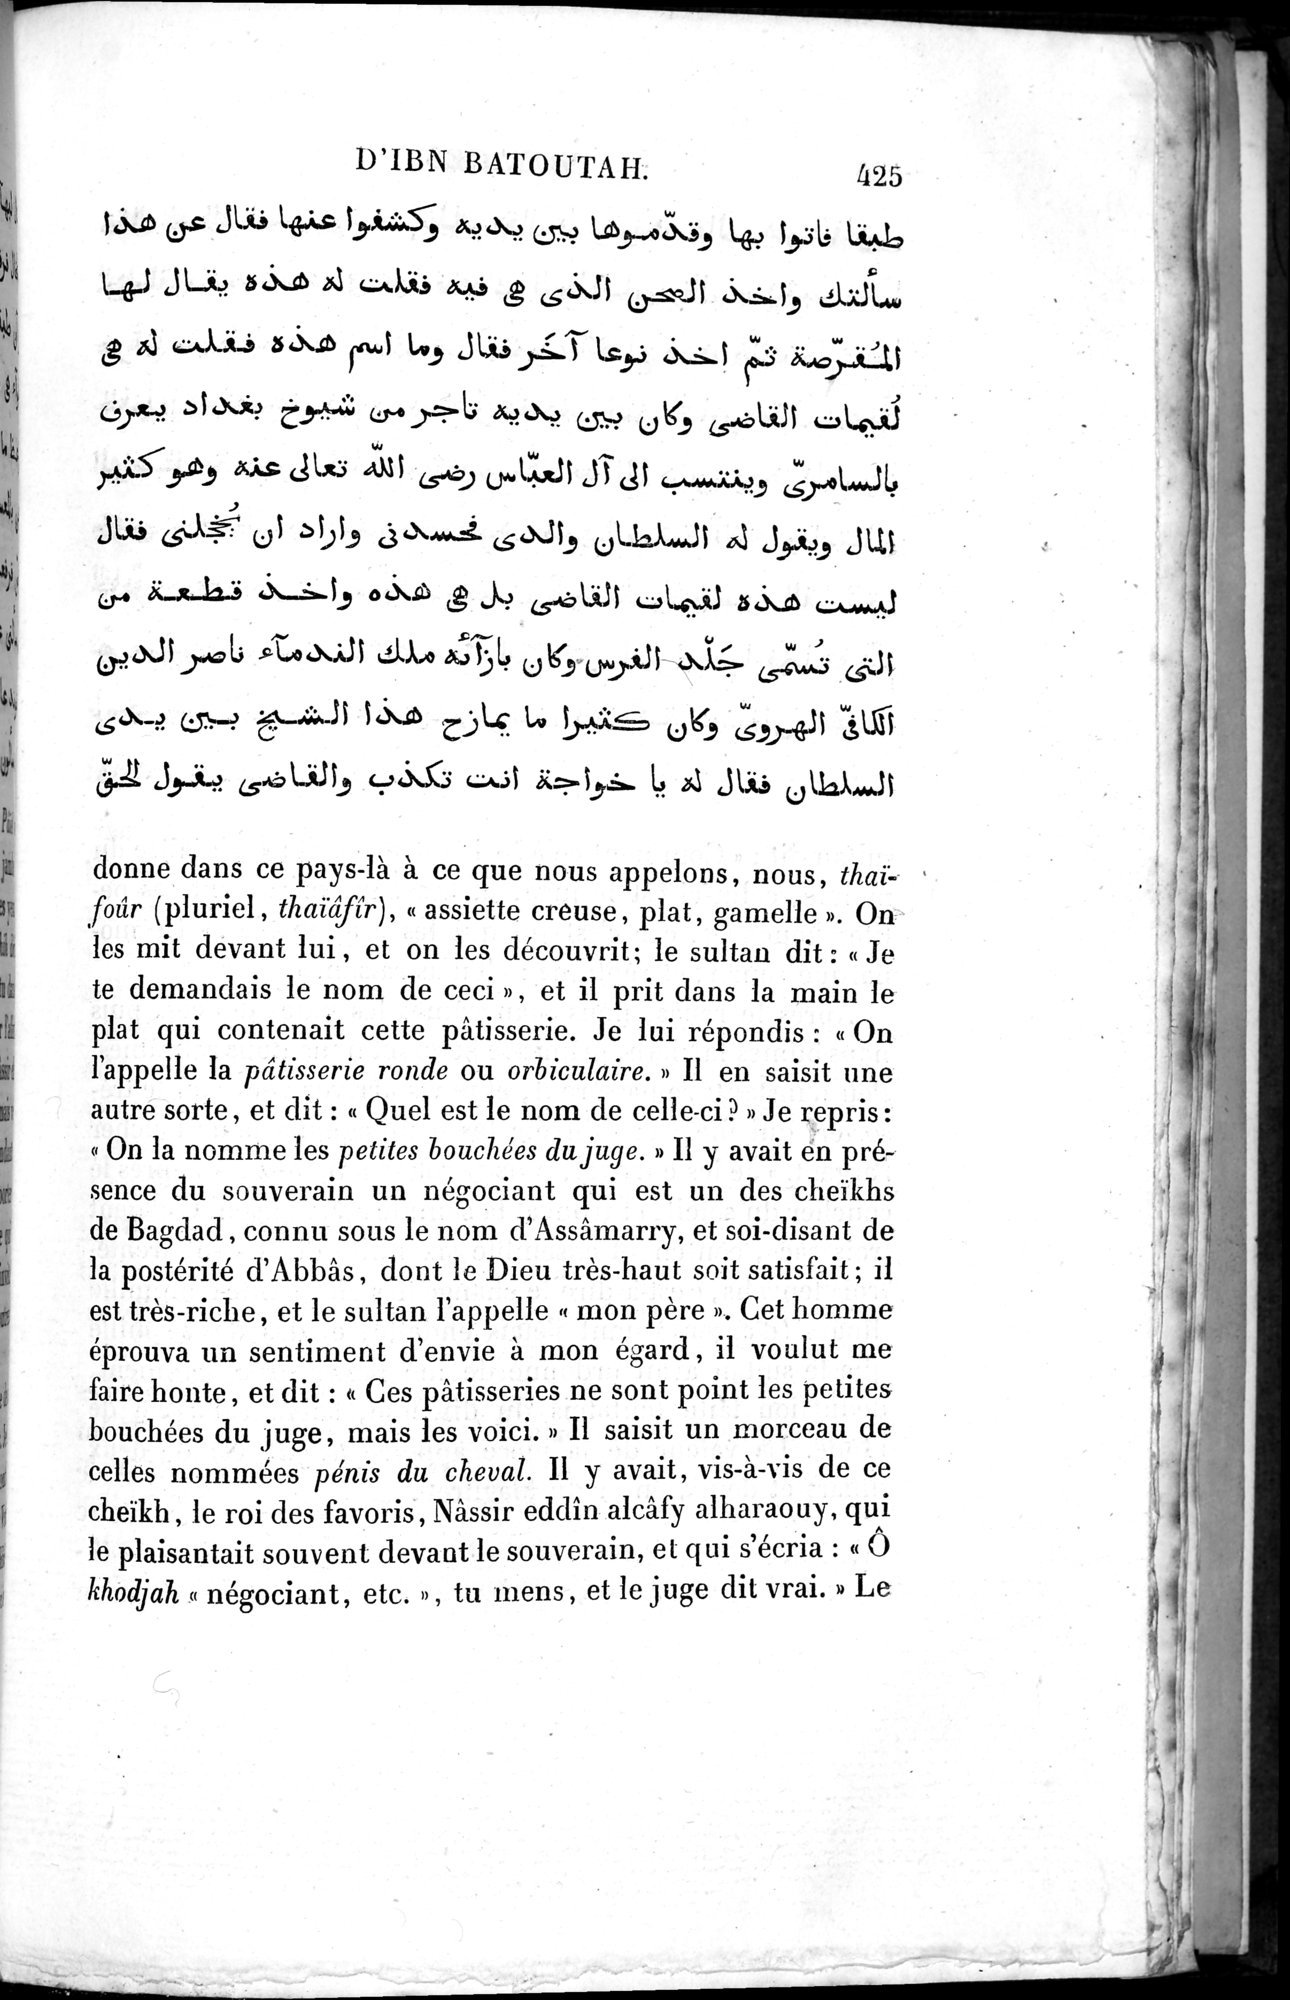 Voyages d'Ibn Batoutah : vol.3 / Page 465 (Grayscale High Resolution Image)